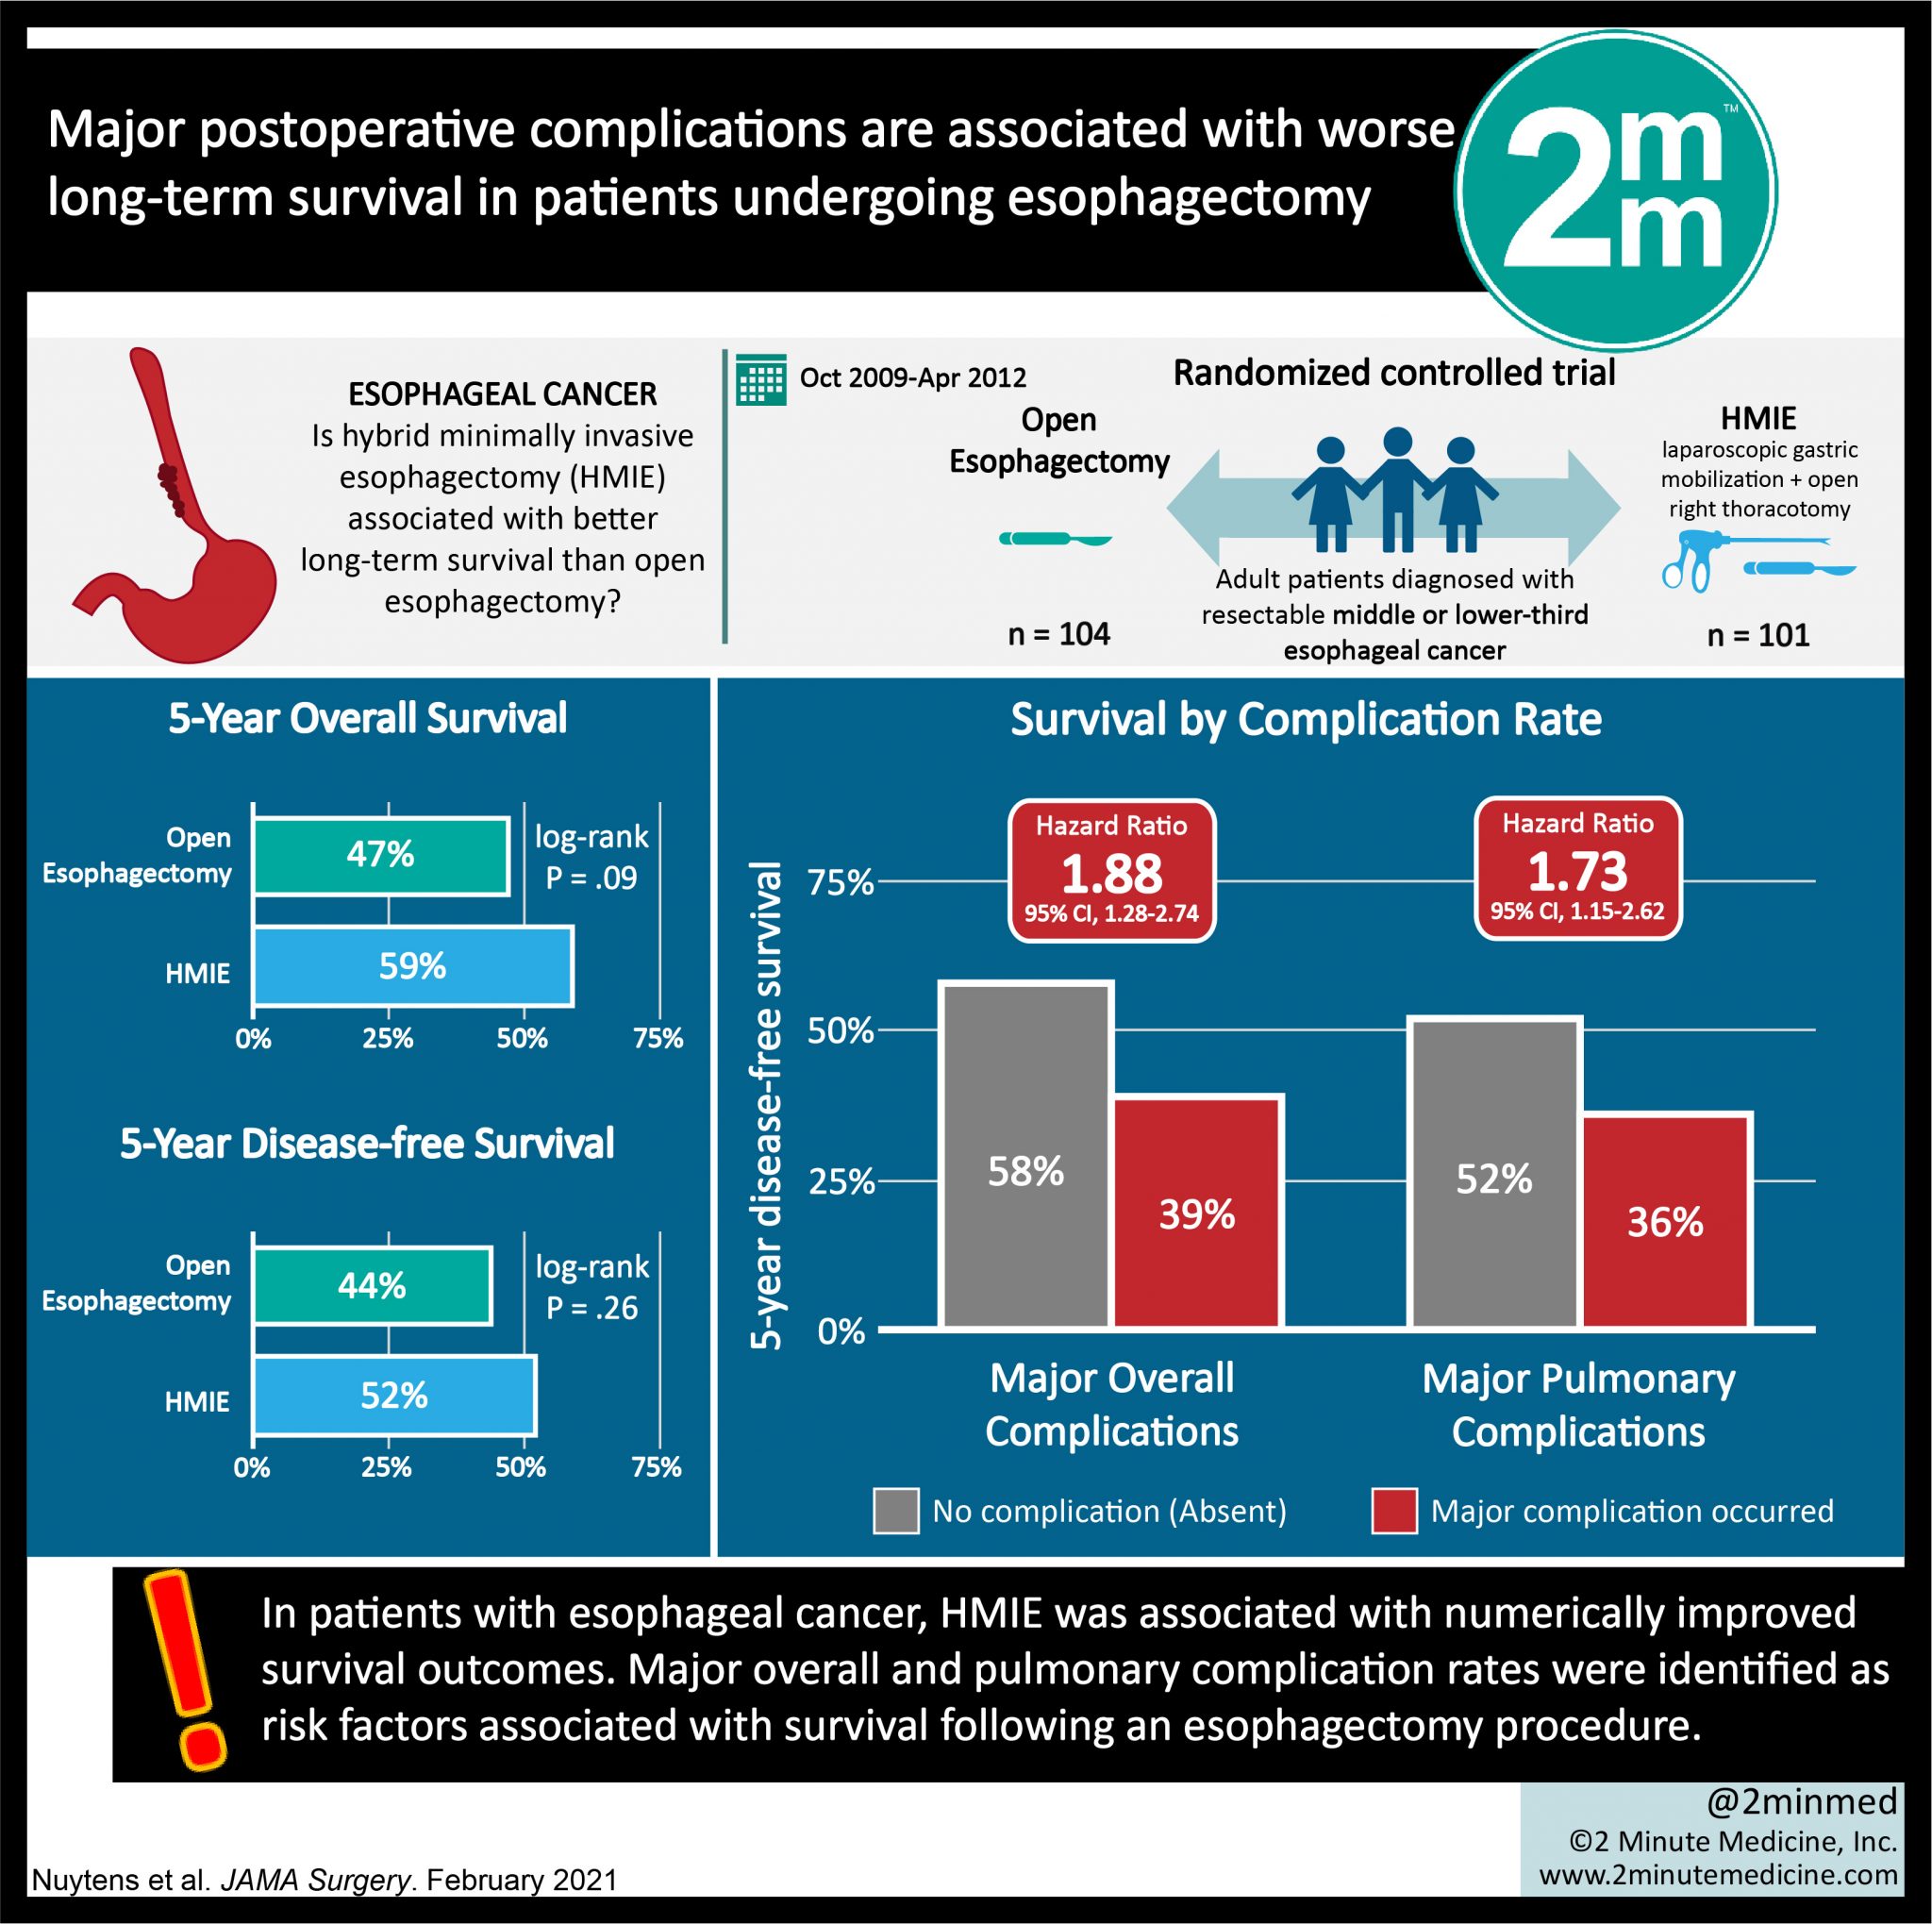 #VisualAbstract: Major postoperative complications are associated with ...